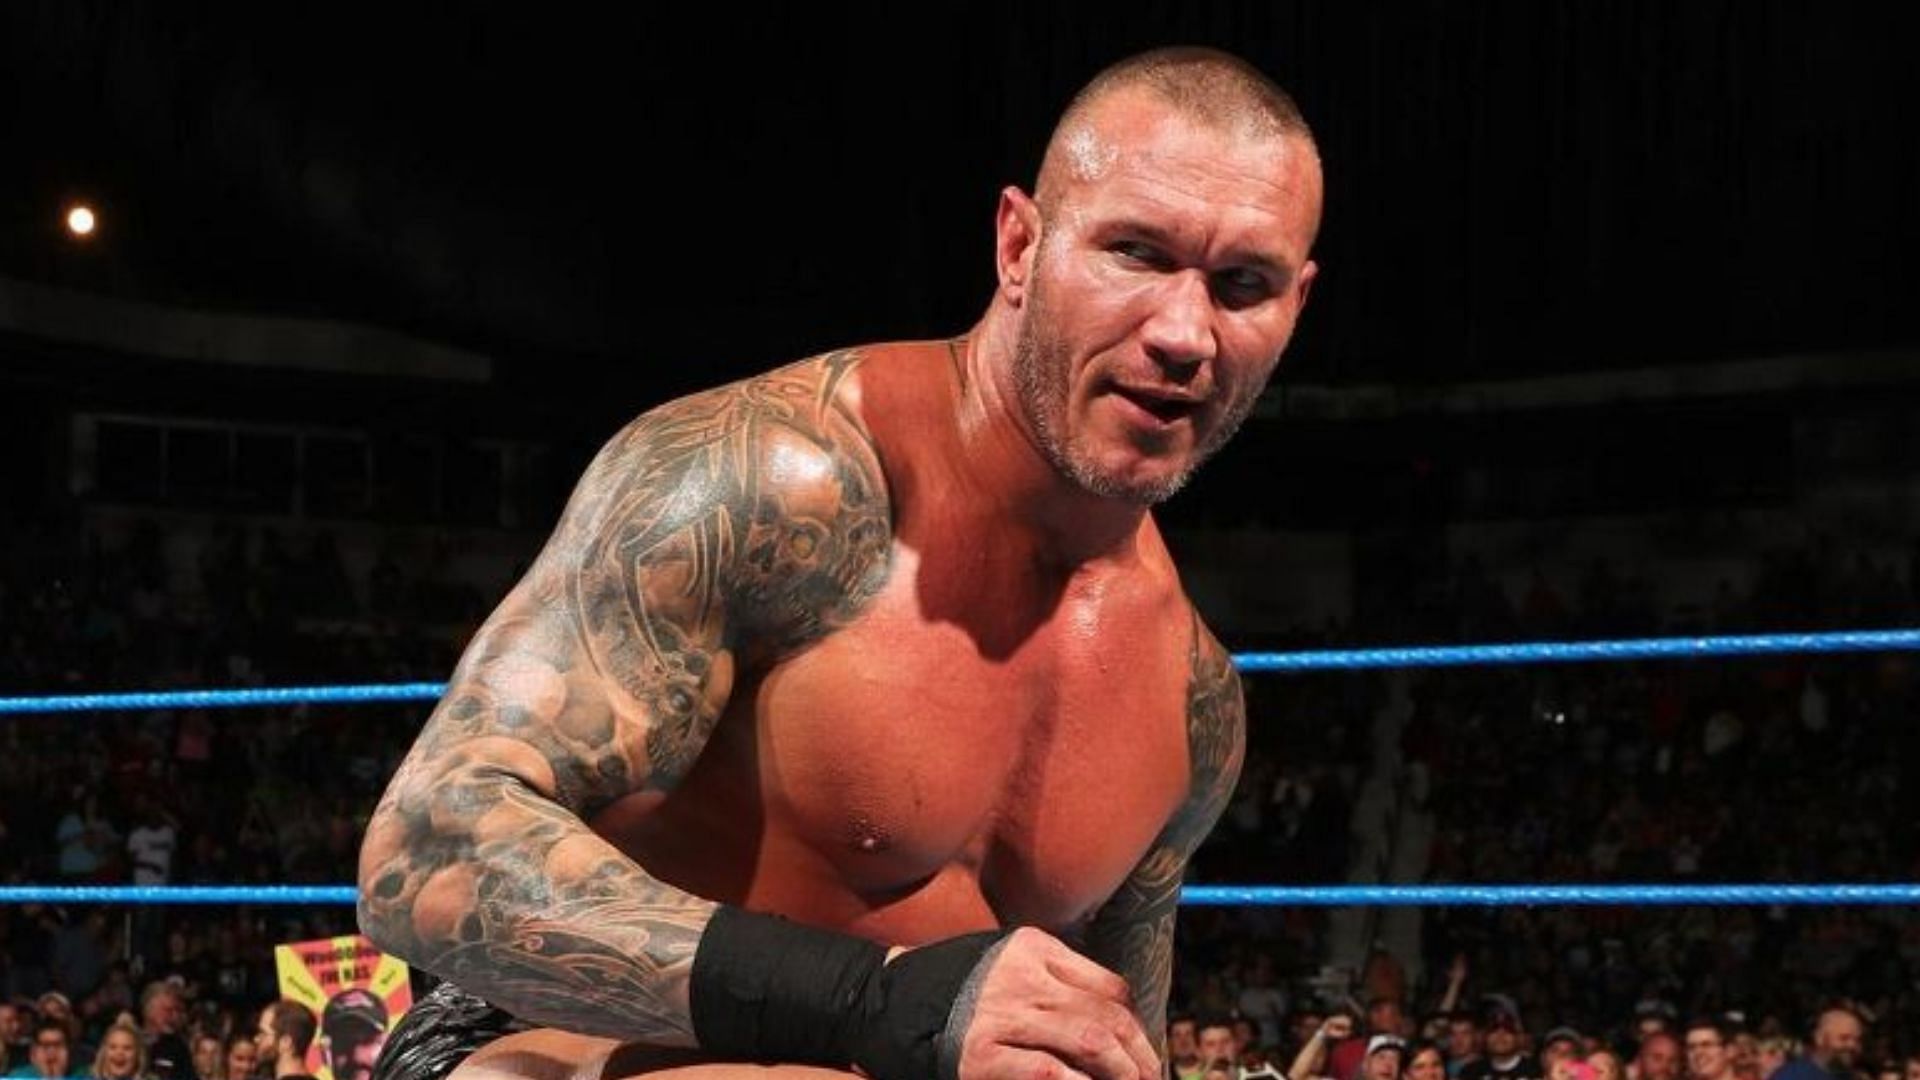 Could Randy Orton shock fans around the world and pull this off?